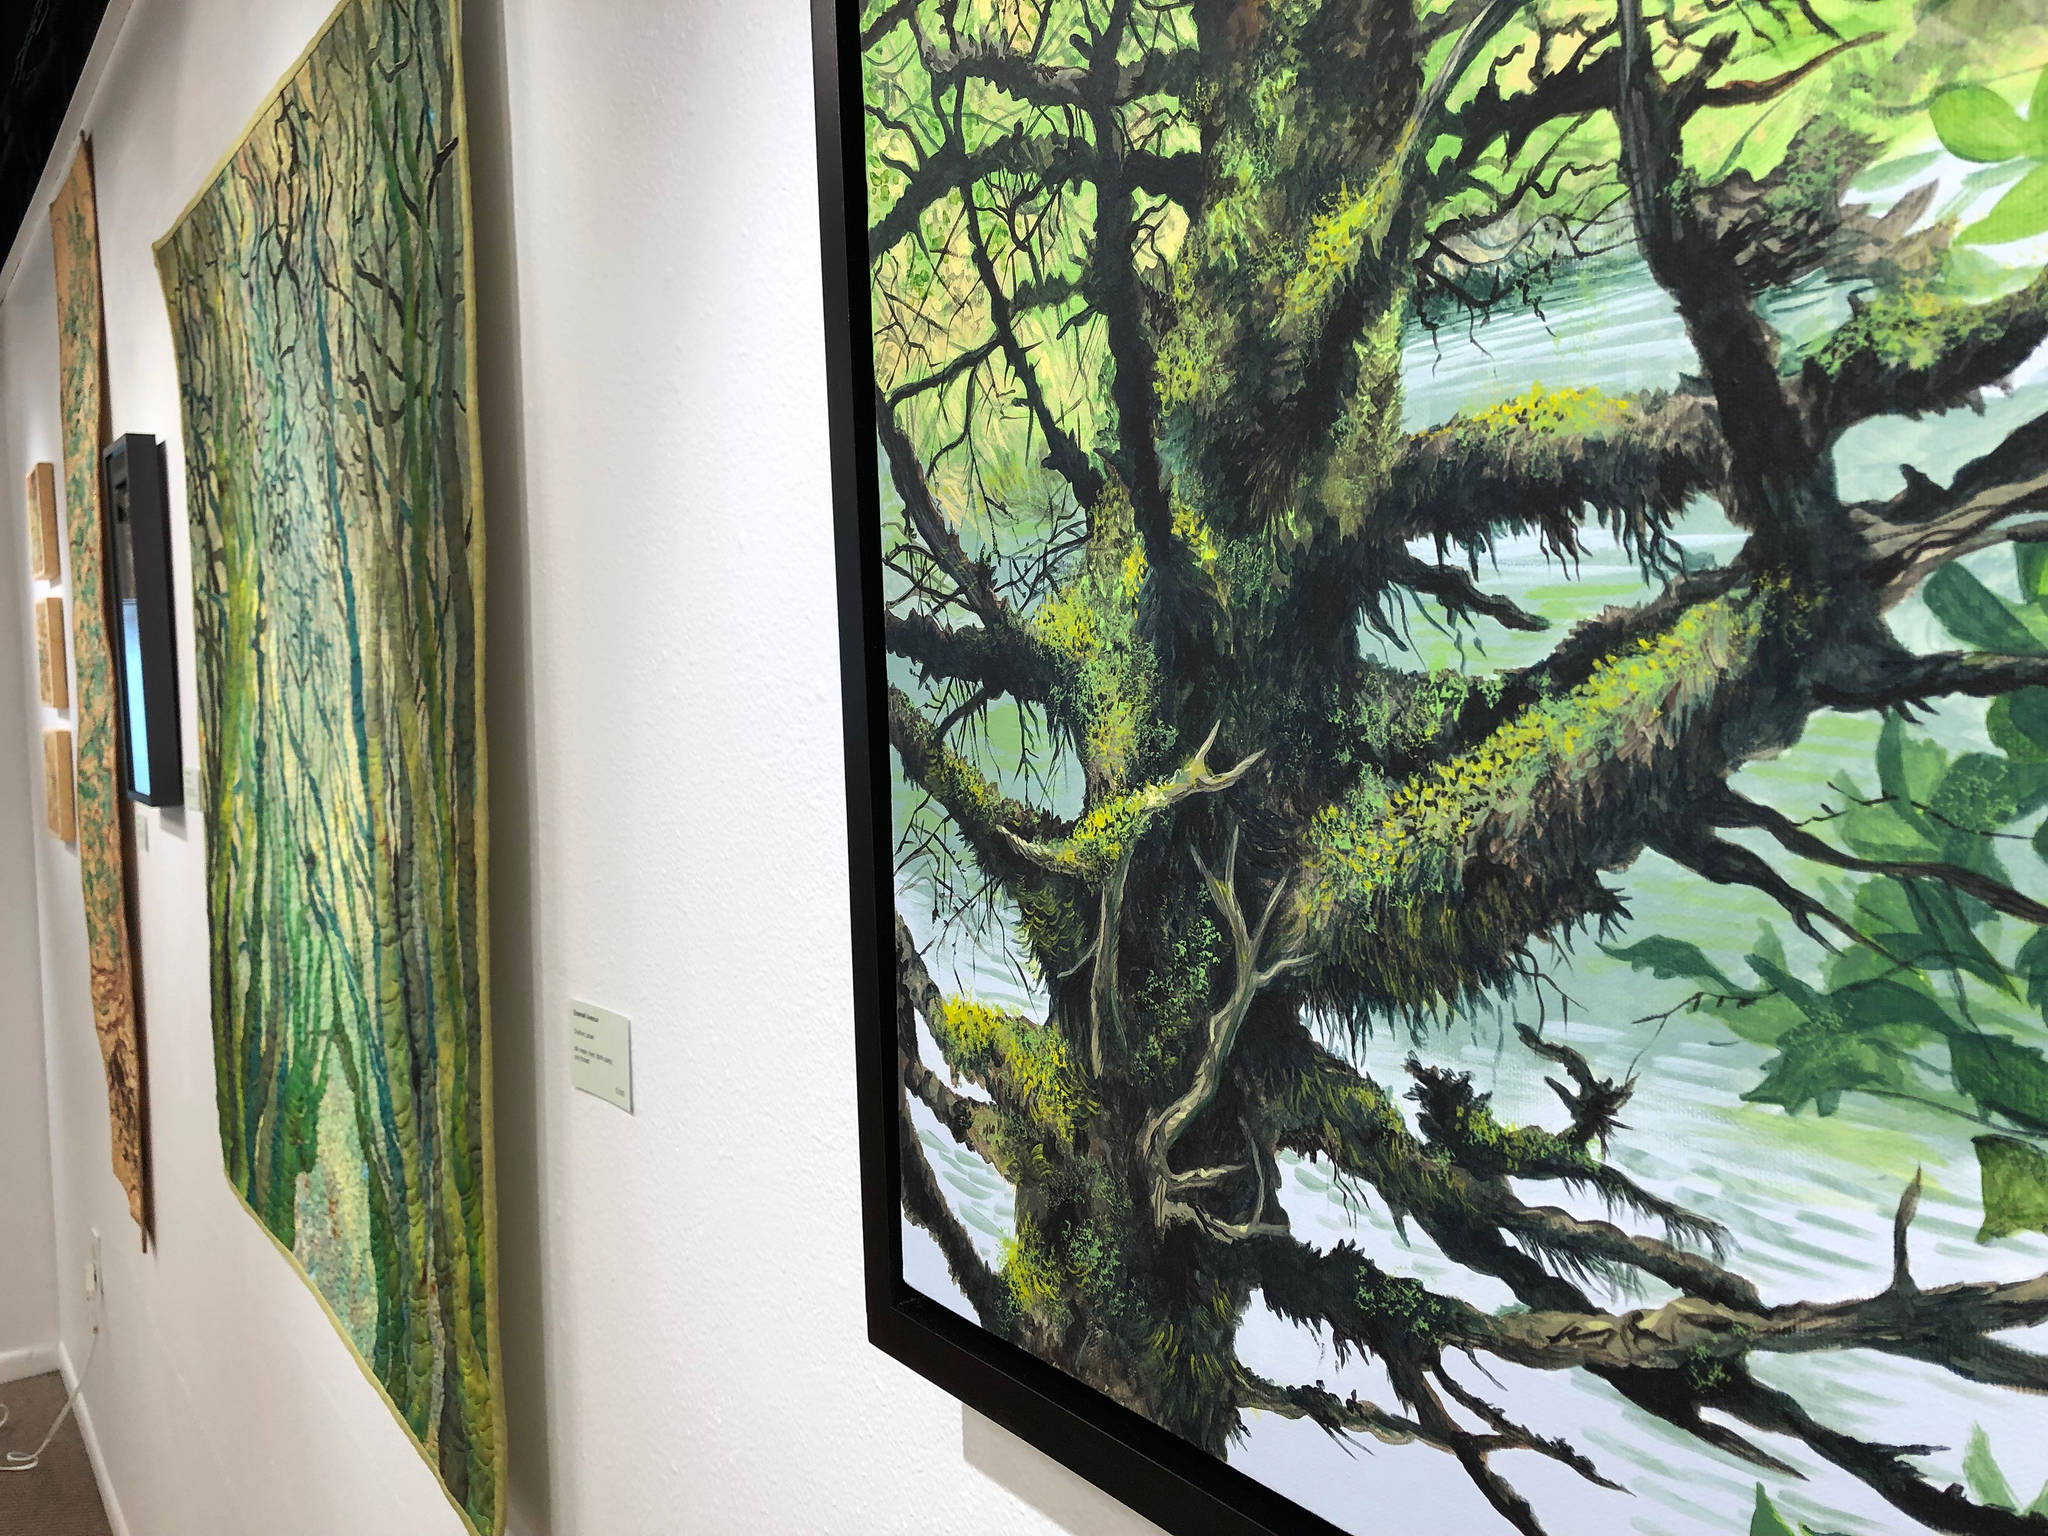 “Mossy Tree at Williwaw,” an acrylic painting by Chelline Larsen, hangs Tuesday at the Kenai Fine Art Center in Kenai. (Photo by Joey Klecka/Peninsula Clarion)